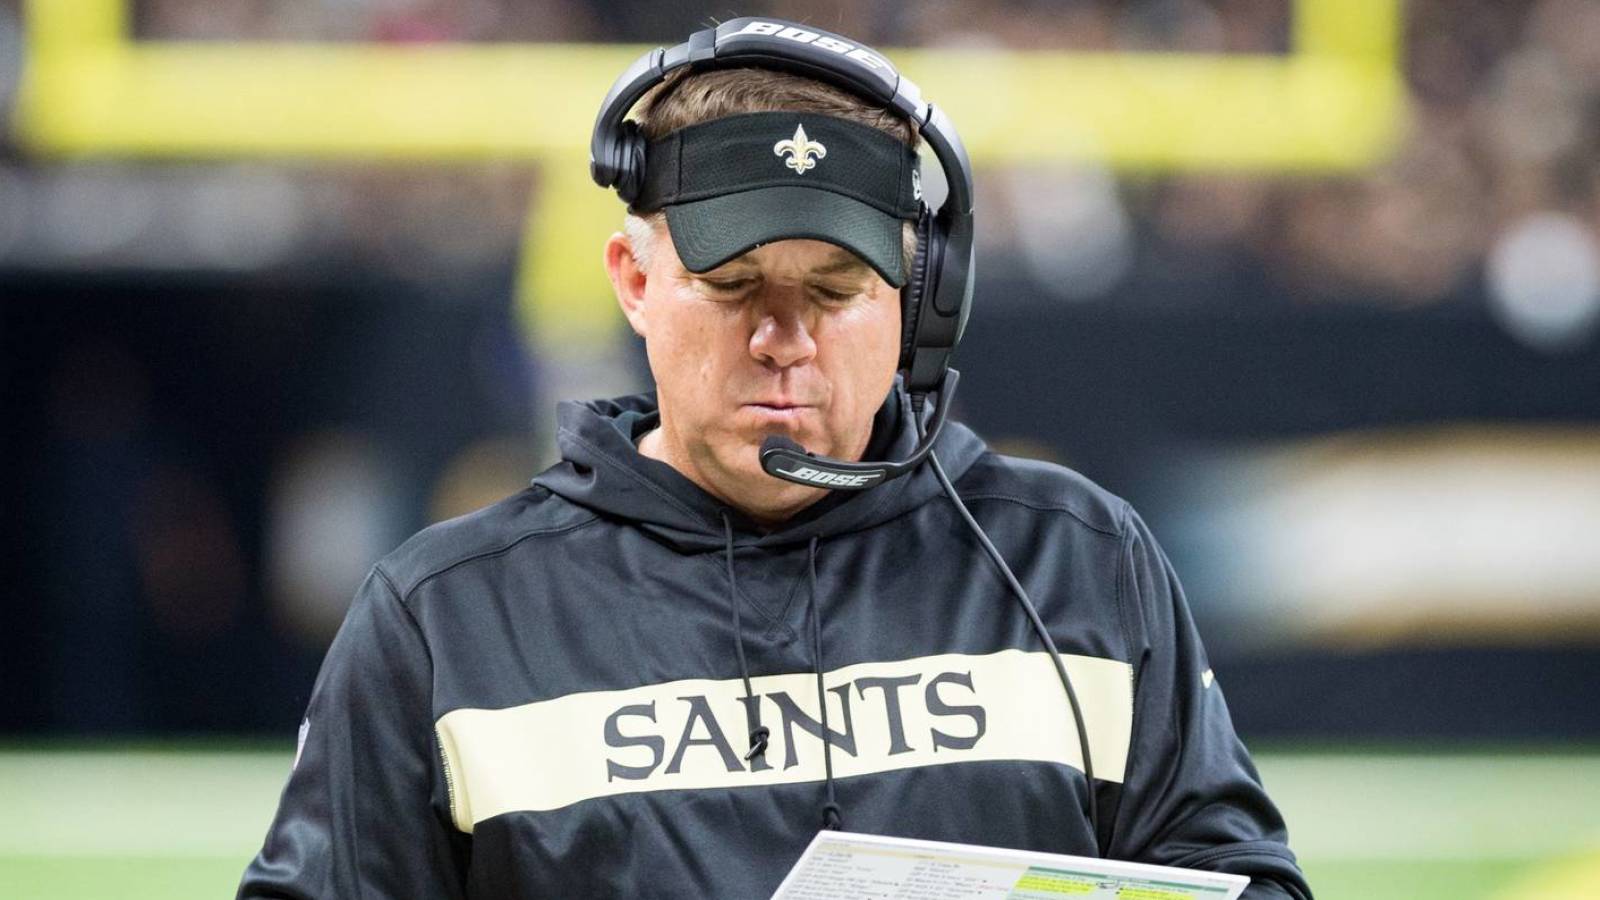 Kevin James to play Saints' Sean Payton in Netflix movie based on 2012 suspension